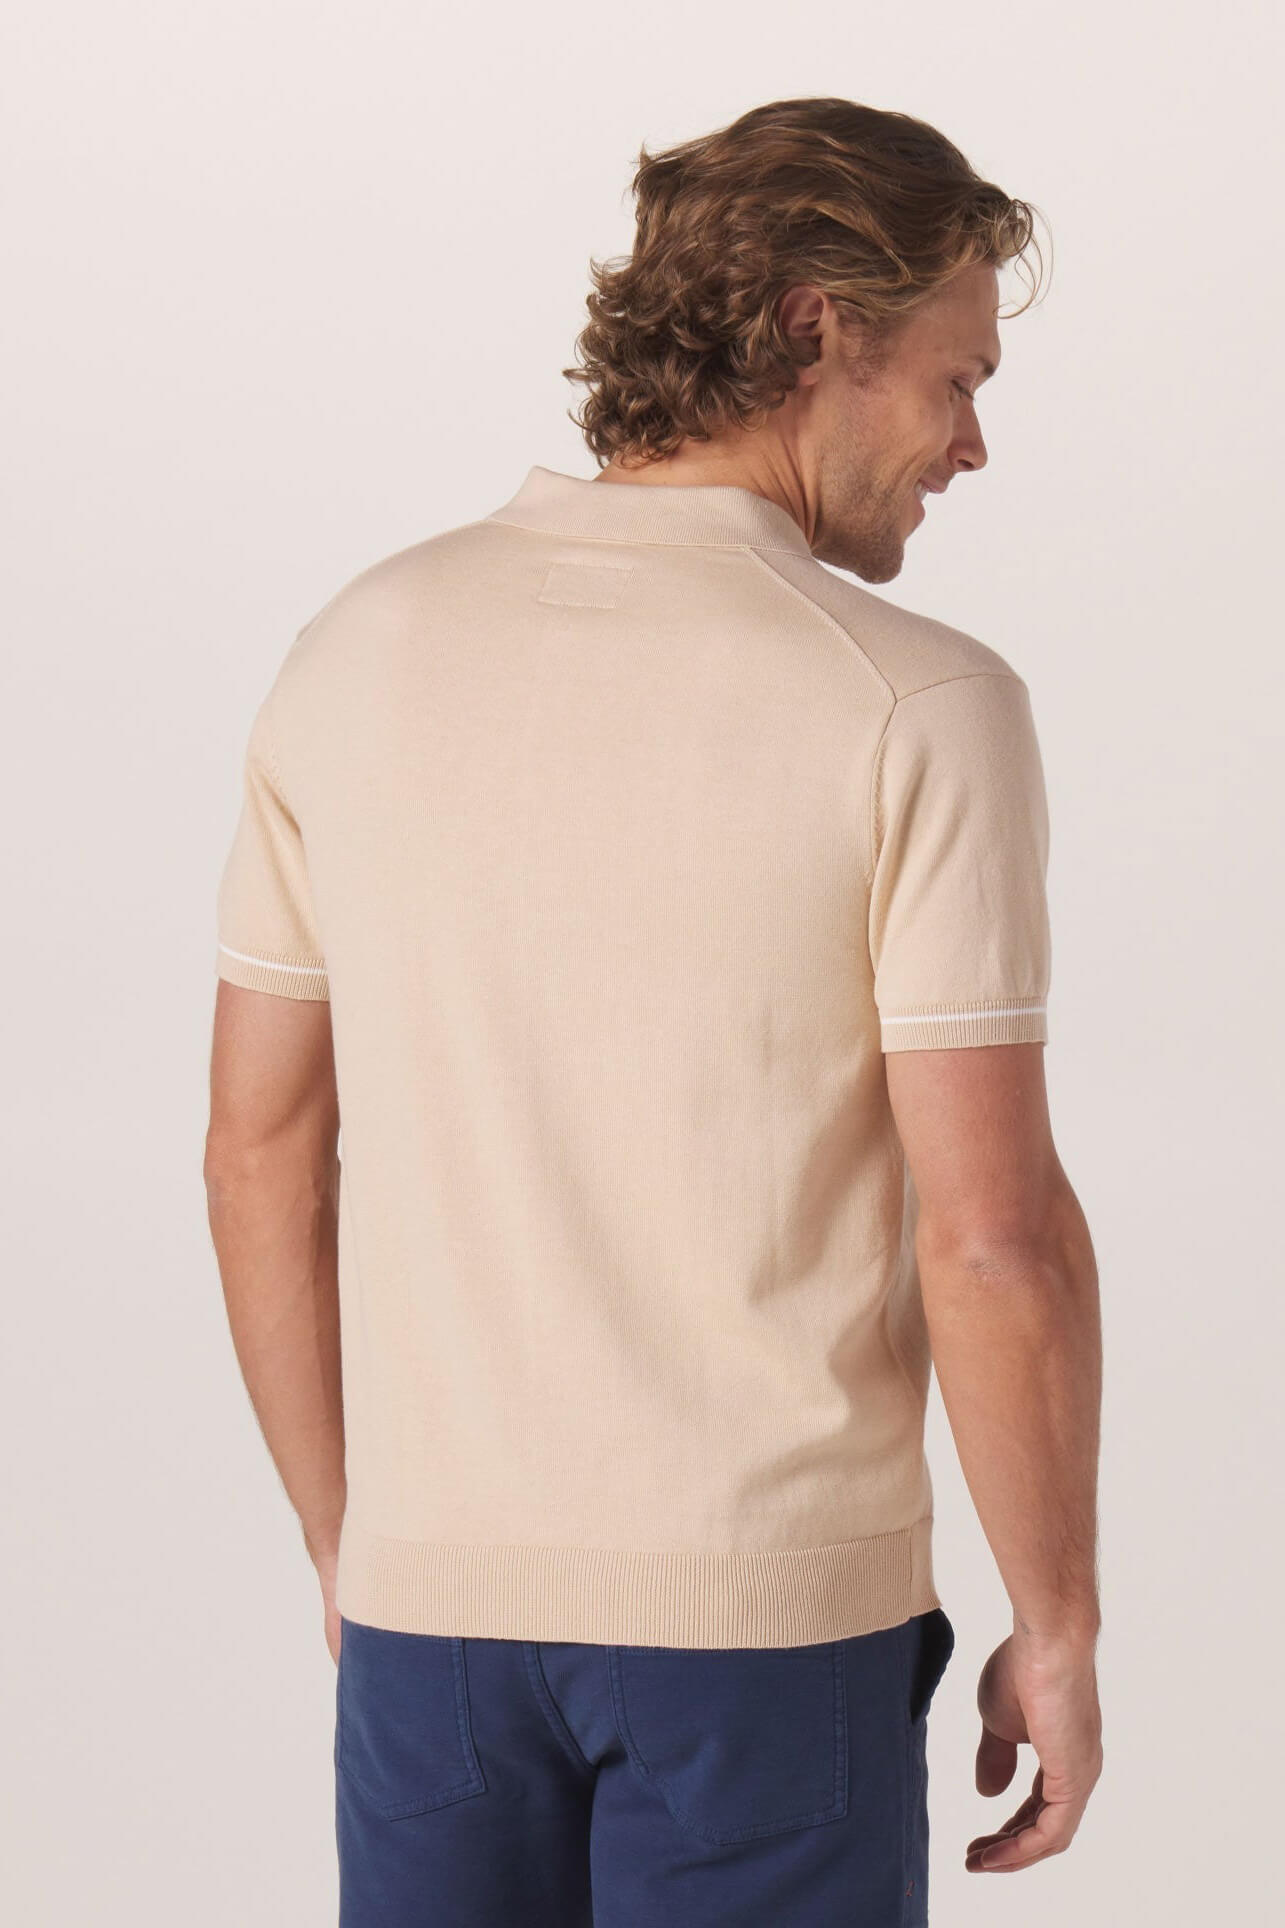 The Normal Brand Robles Knit Polo in cream